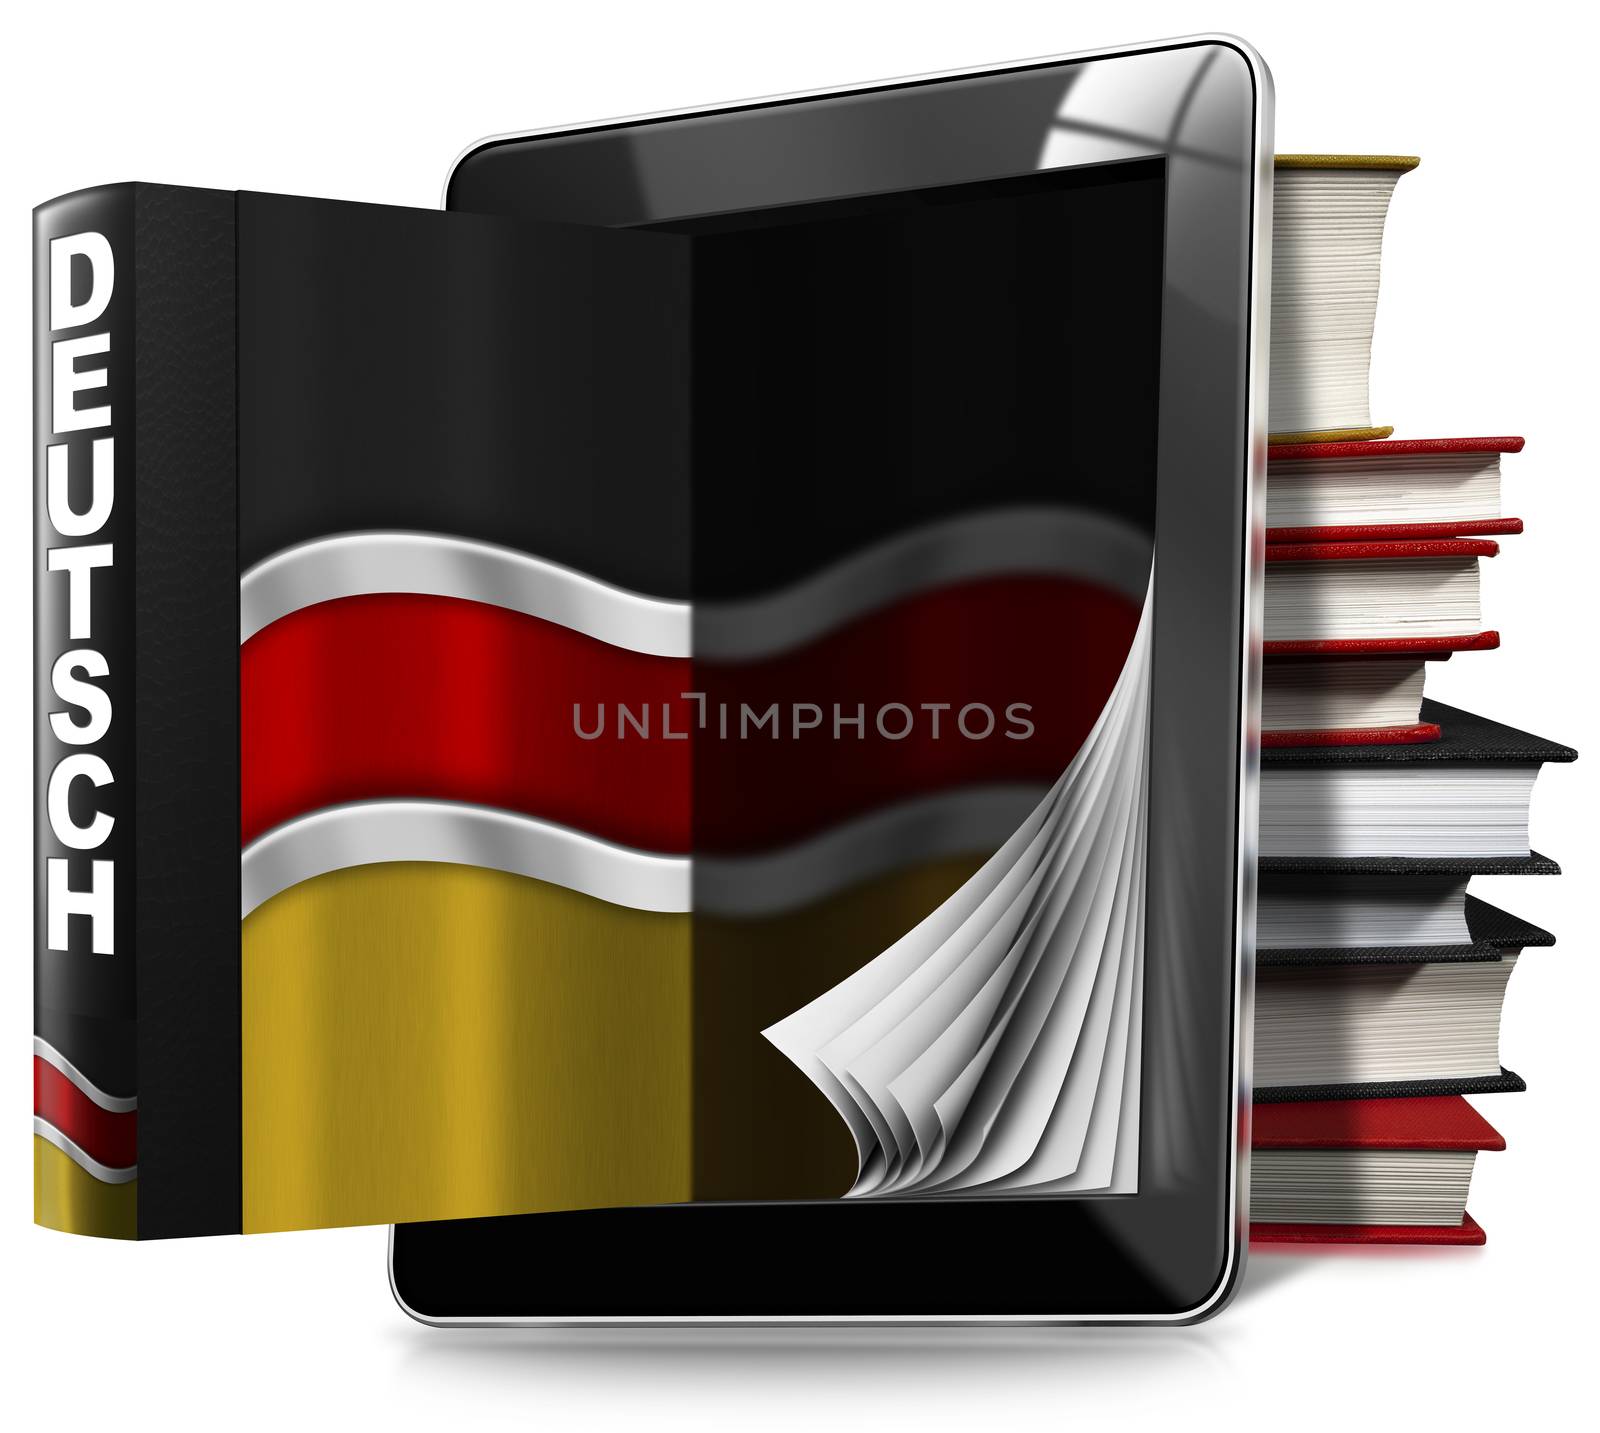 Learn German - Tablet Computer and Books by catalby